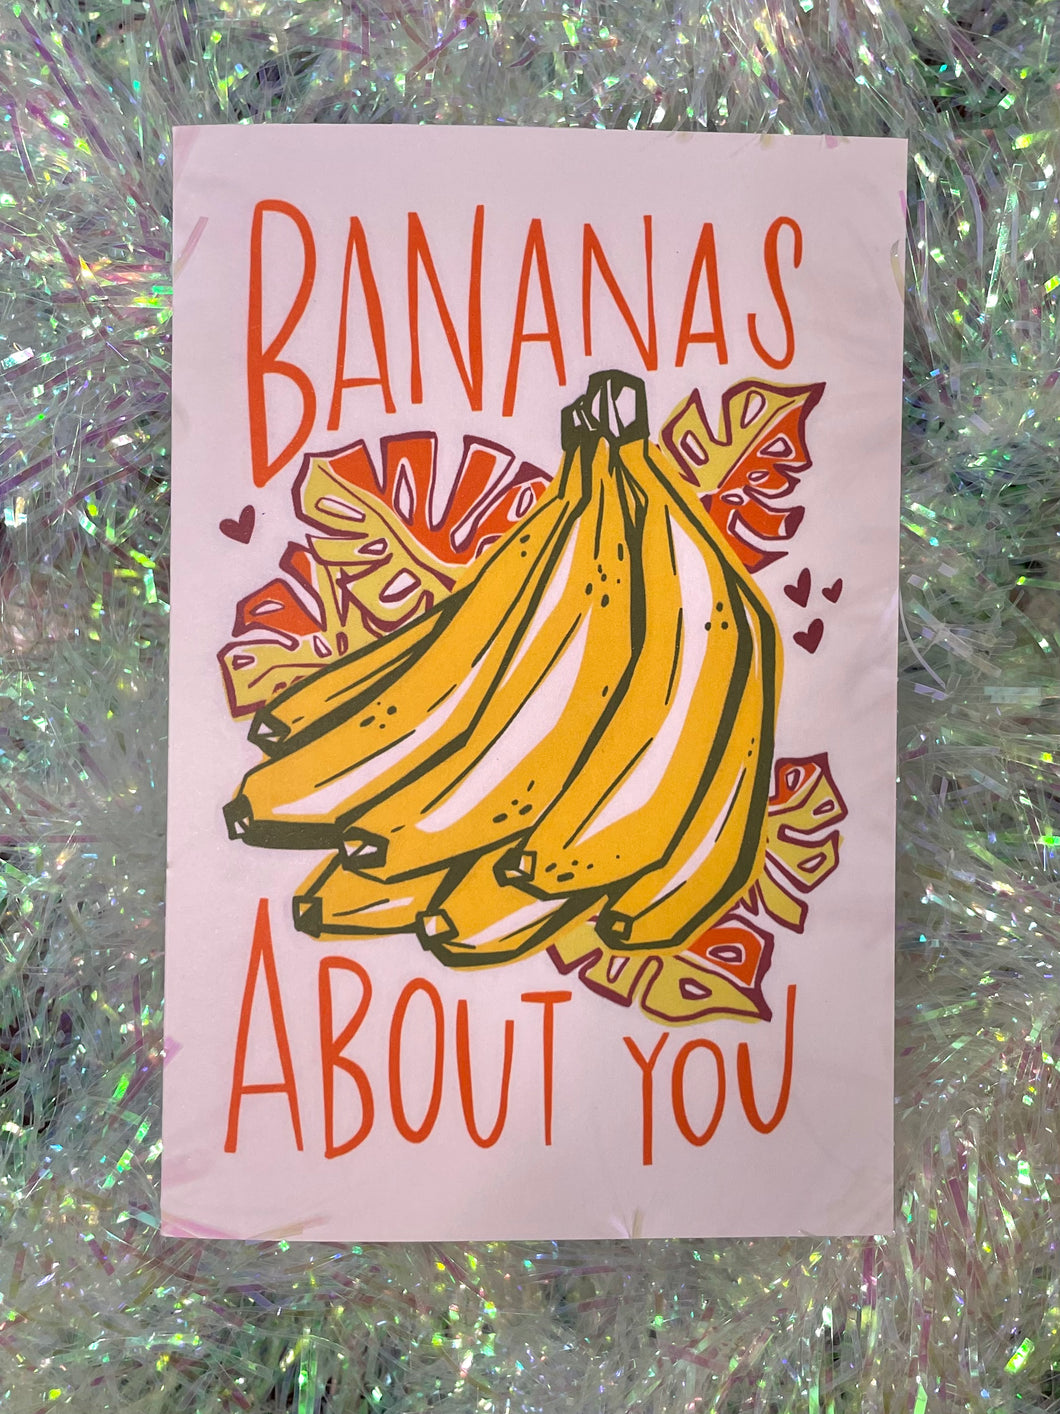 Bananas About You